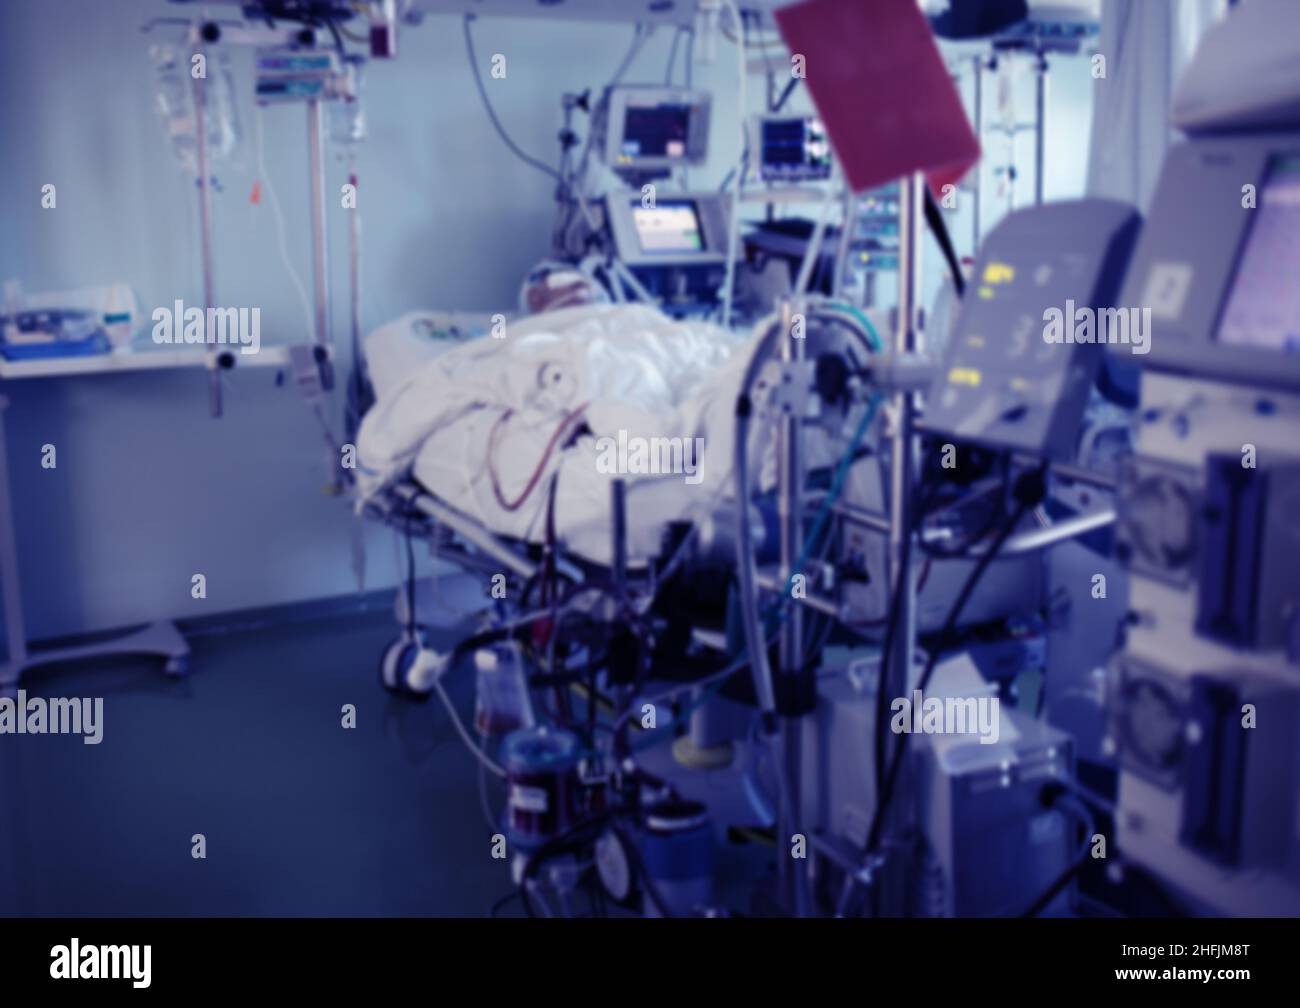 Critically ill comatose patient in the hospital bed connected to the advanced life support equipment in the ICU, unfocused background. Stock Photo